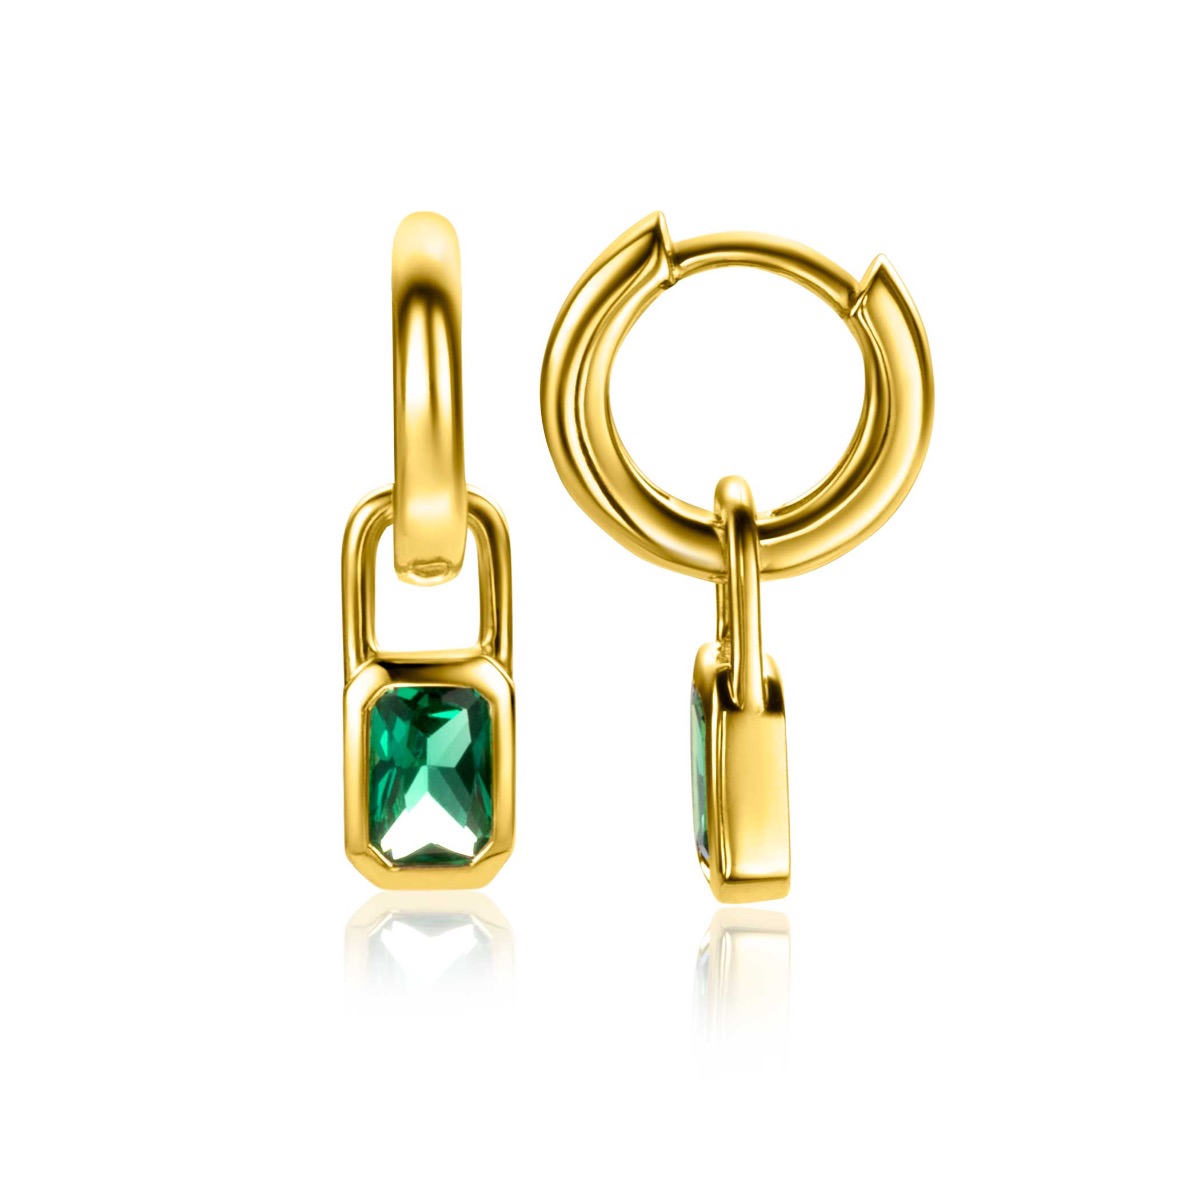 13mm ZINZI Gold Plated Sterling Silver Earrings Pendants Rectangle with Green Color Stones ZICH2307 (excl. hoop earrings)